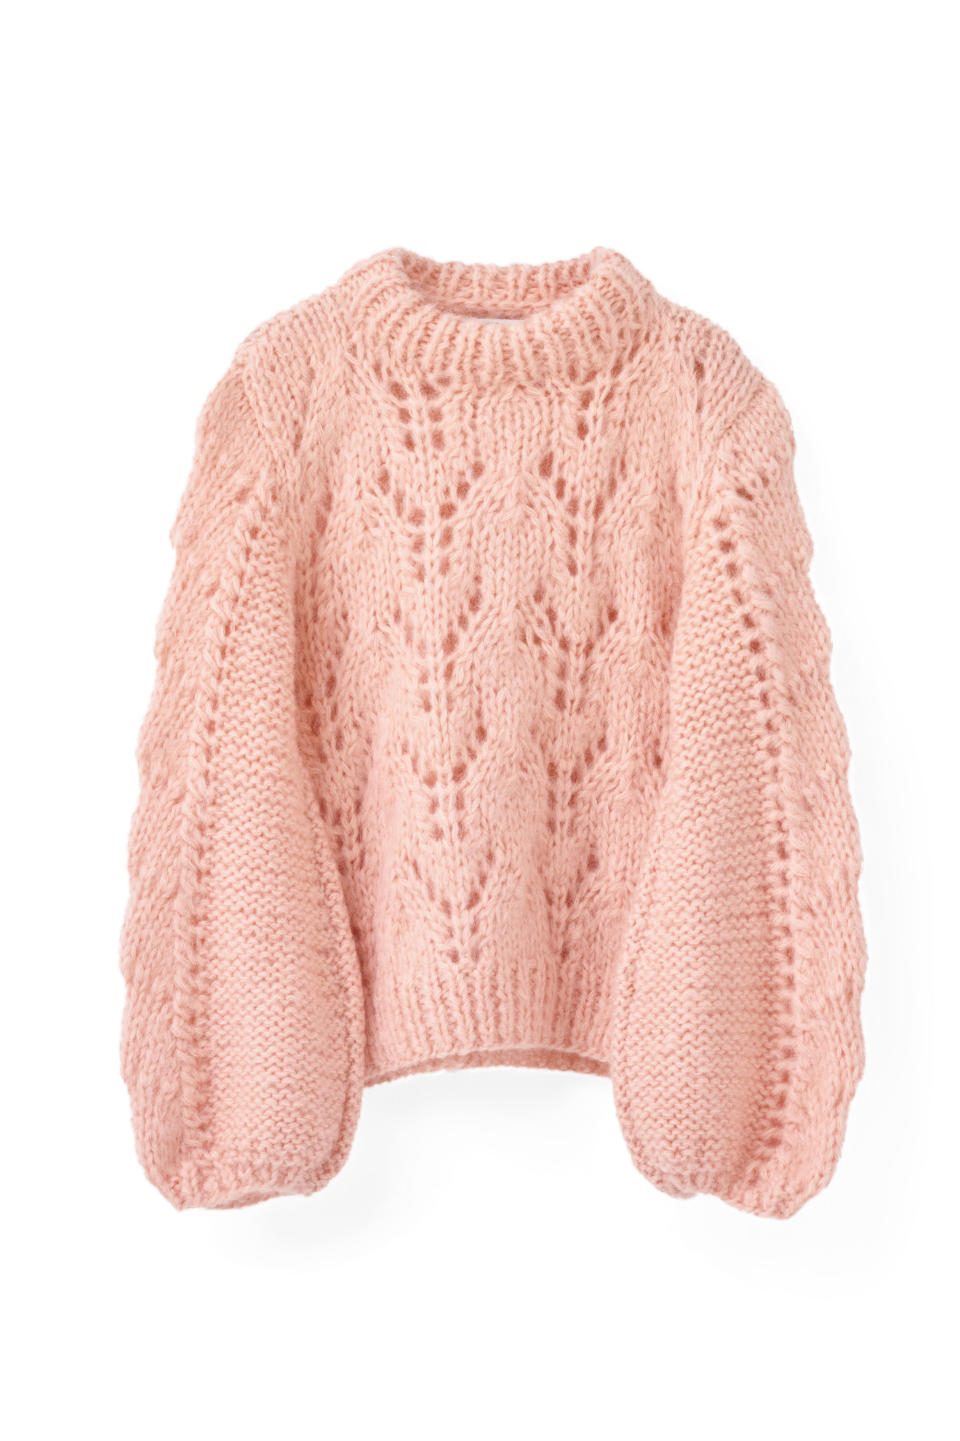 Invest in the ‘It’ jumper of the season